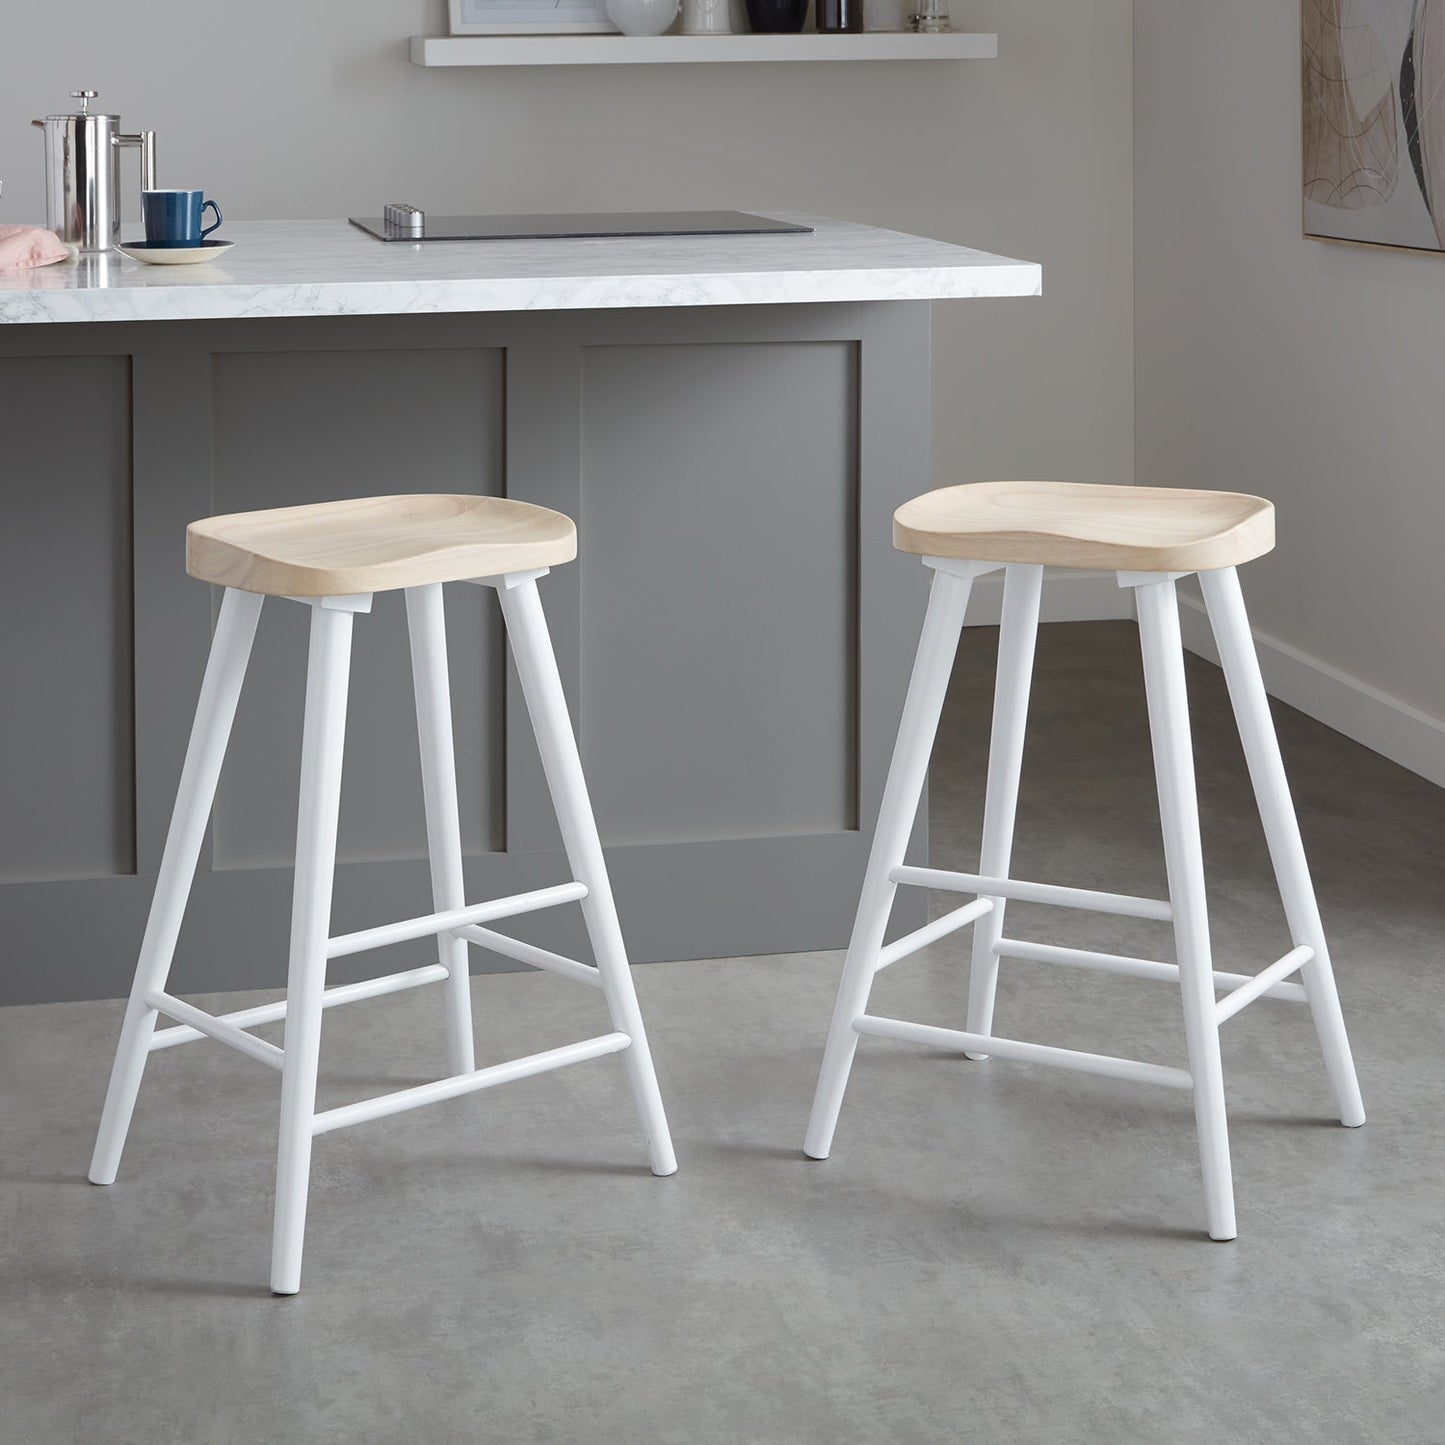 Silvester bar stool - white frame with whitewash top - Laura James